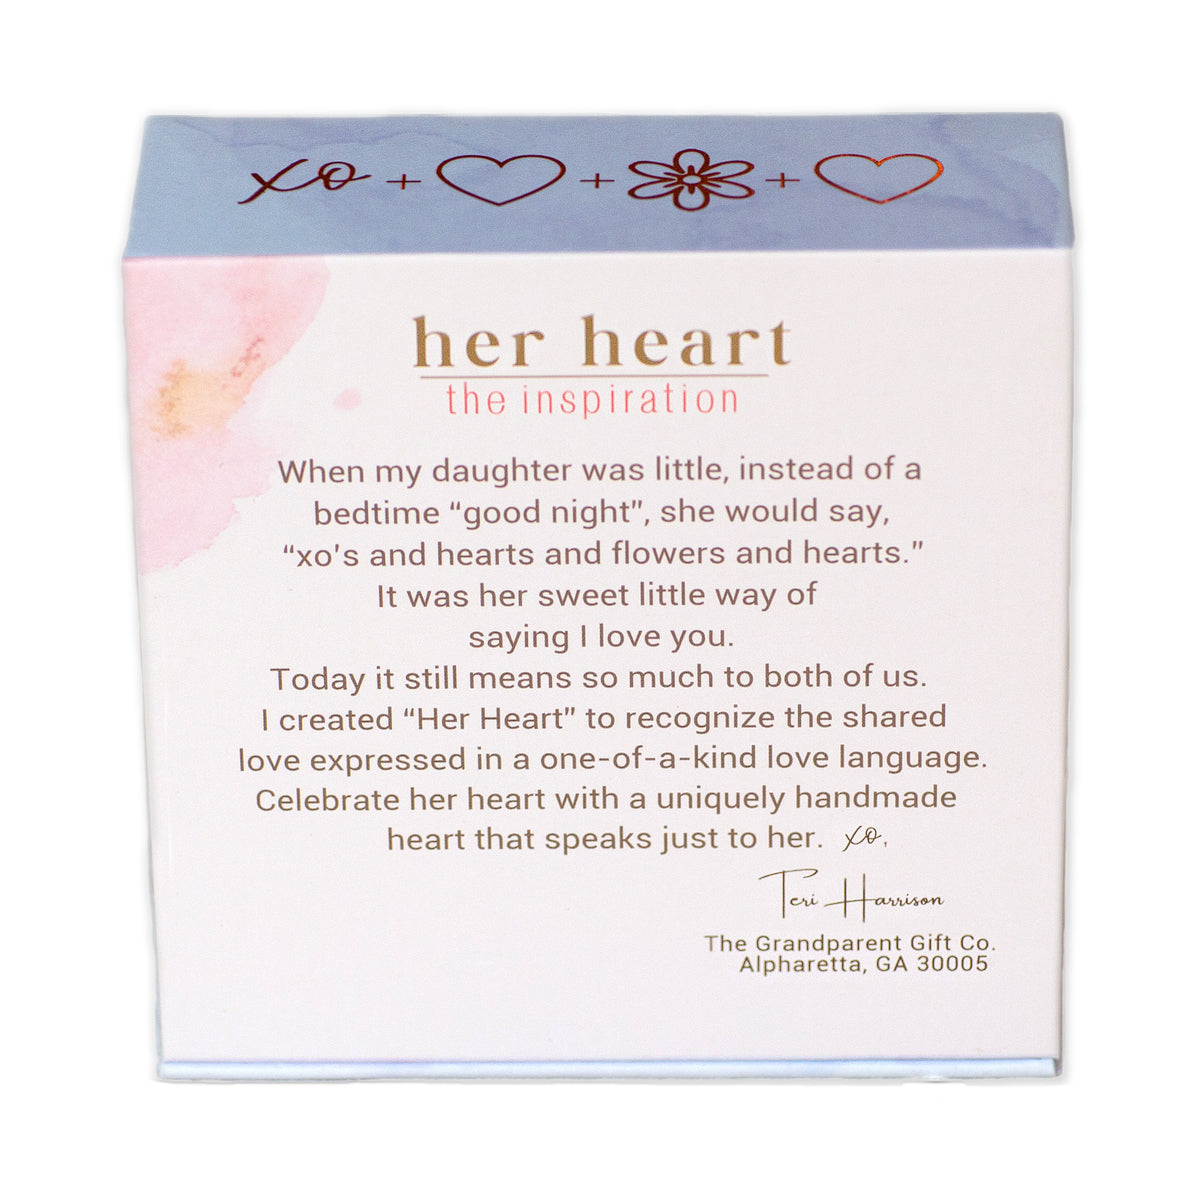 Bottom of the Her Heart gift box with the inspiration behind the product as described in the product story.